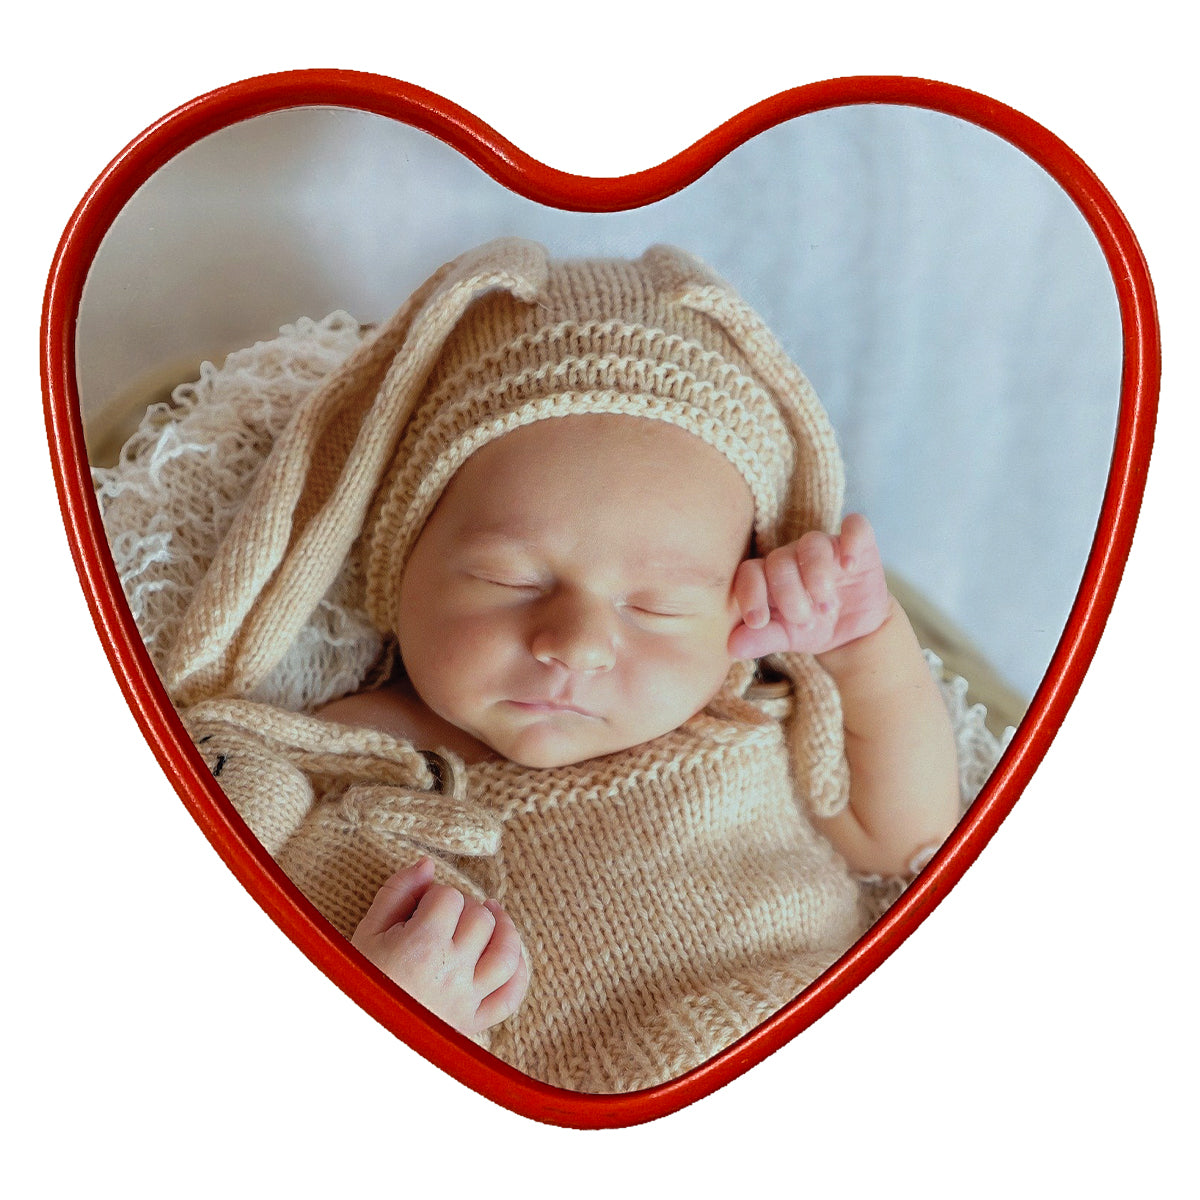 ShopQuality4U Personalised Photo Tin Baby Keepsake Red Heart Shaped Tins With Scented Rose Candle for him or her